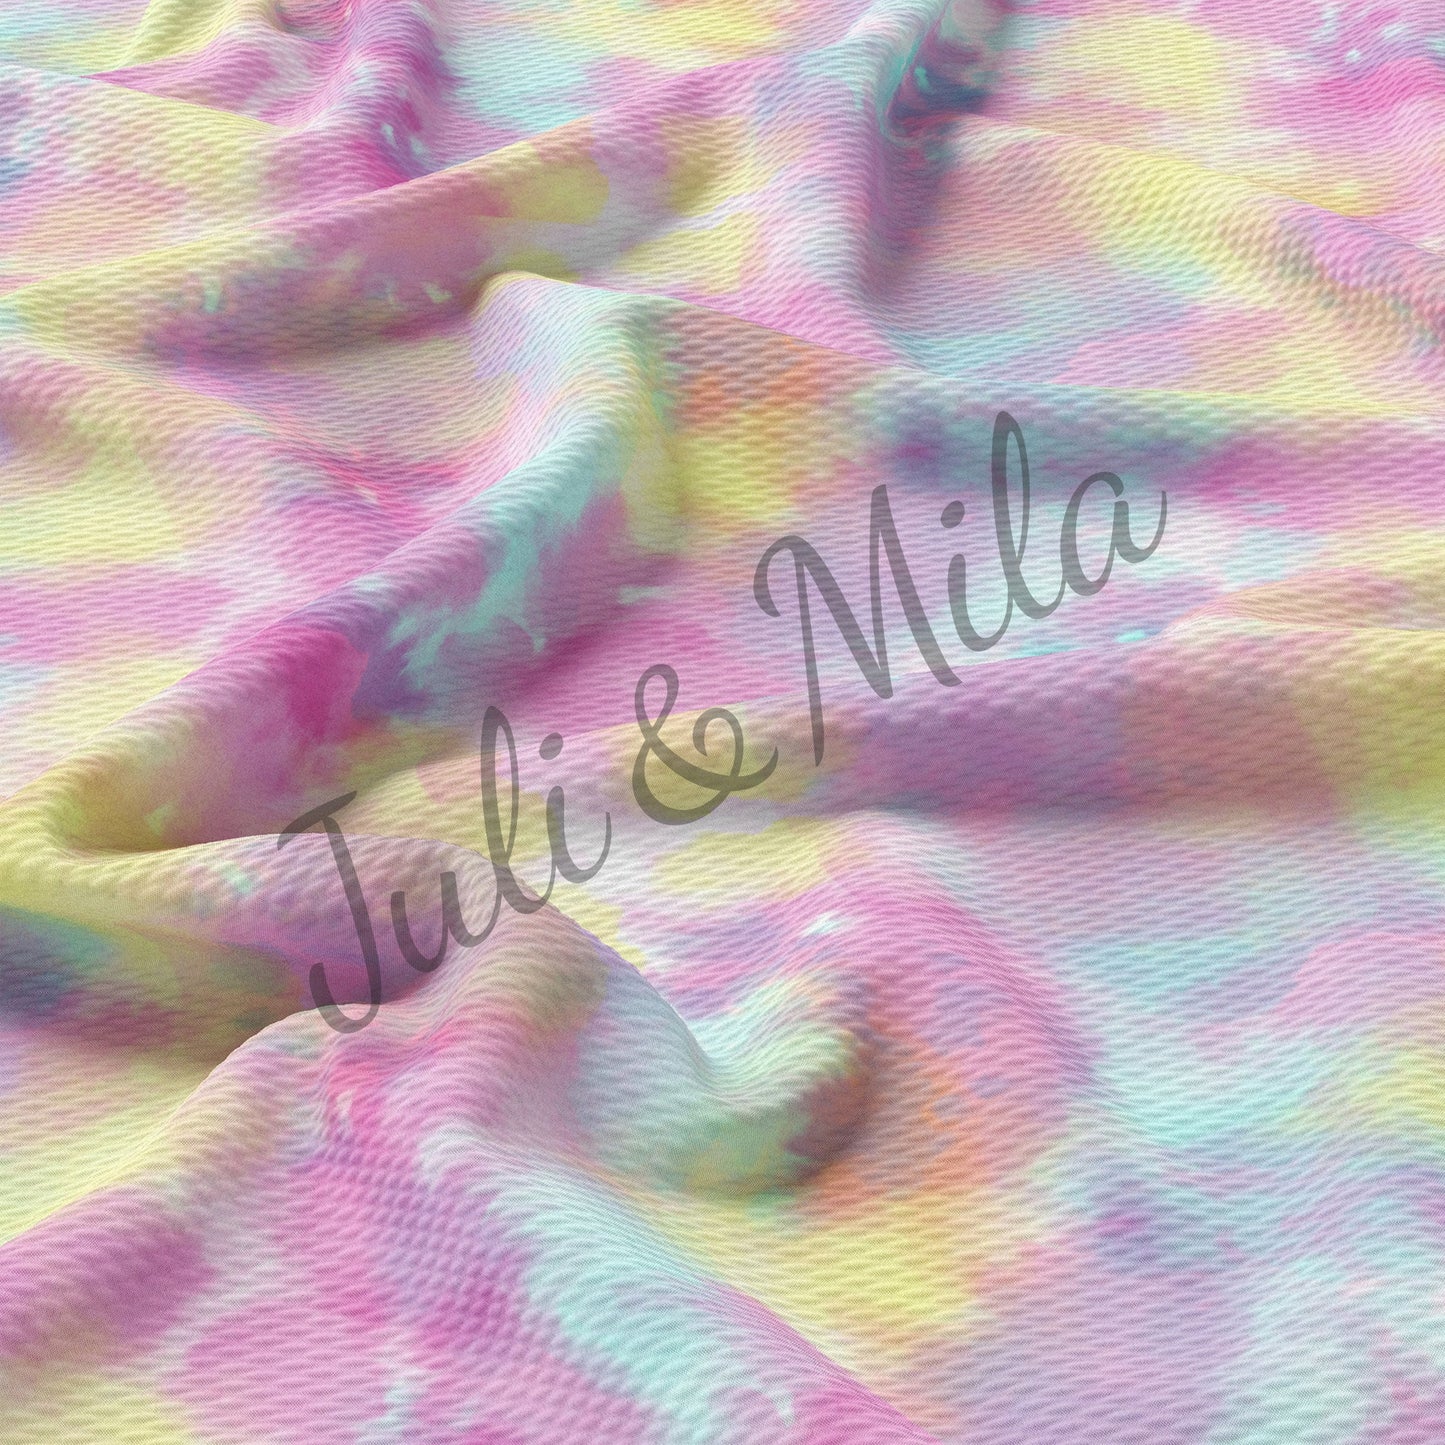 Bullet Textured Fabric  Fabric Tie Dye